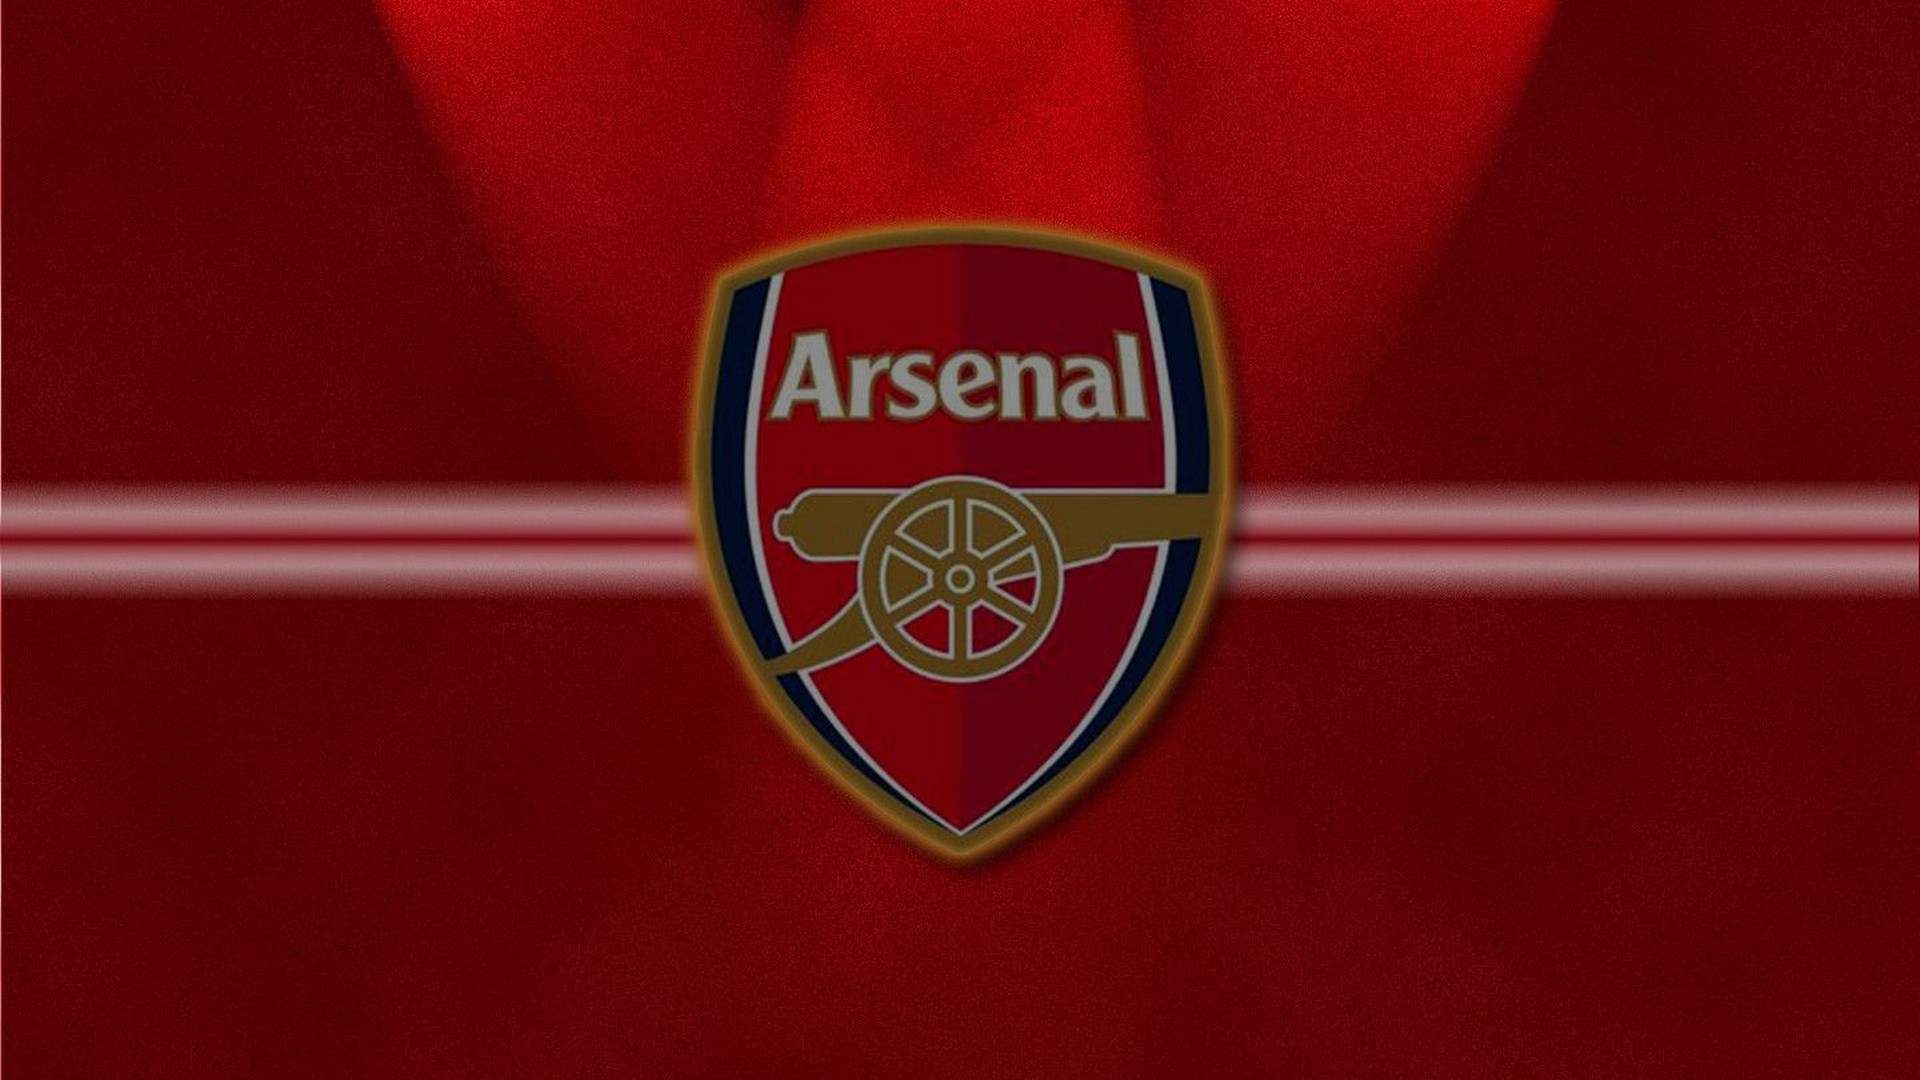 Arsenal For PC Wallpaper With high-resolution 1920X1080 pixel. You can use this wallpaper for your Desktop Computers, Mac Screensavers, Windows Backgrounds, iPhone Wallpapers, Tablet or Android Lock screen and another Mobile device